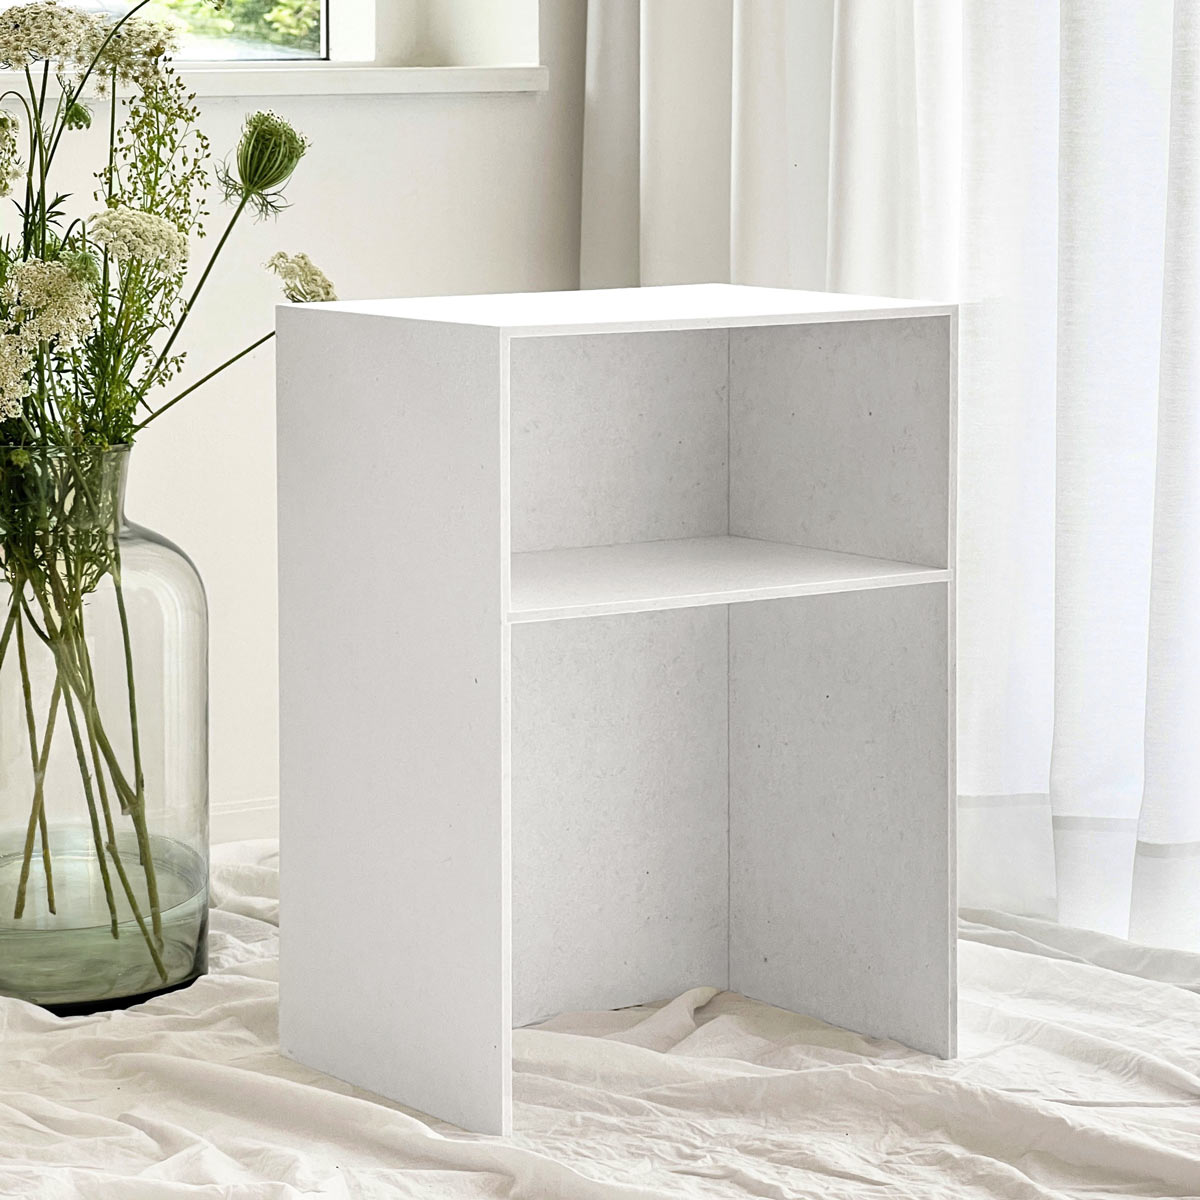 Amolia-recycled-bedside-table-white-louie-1